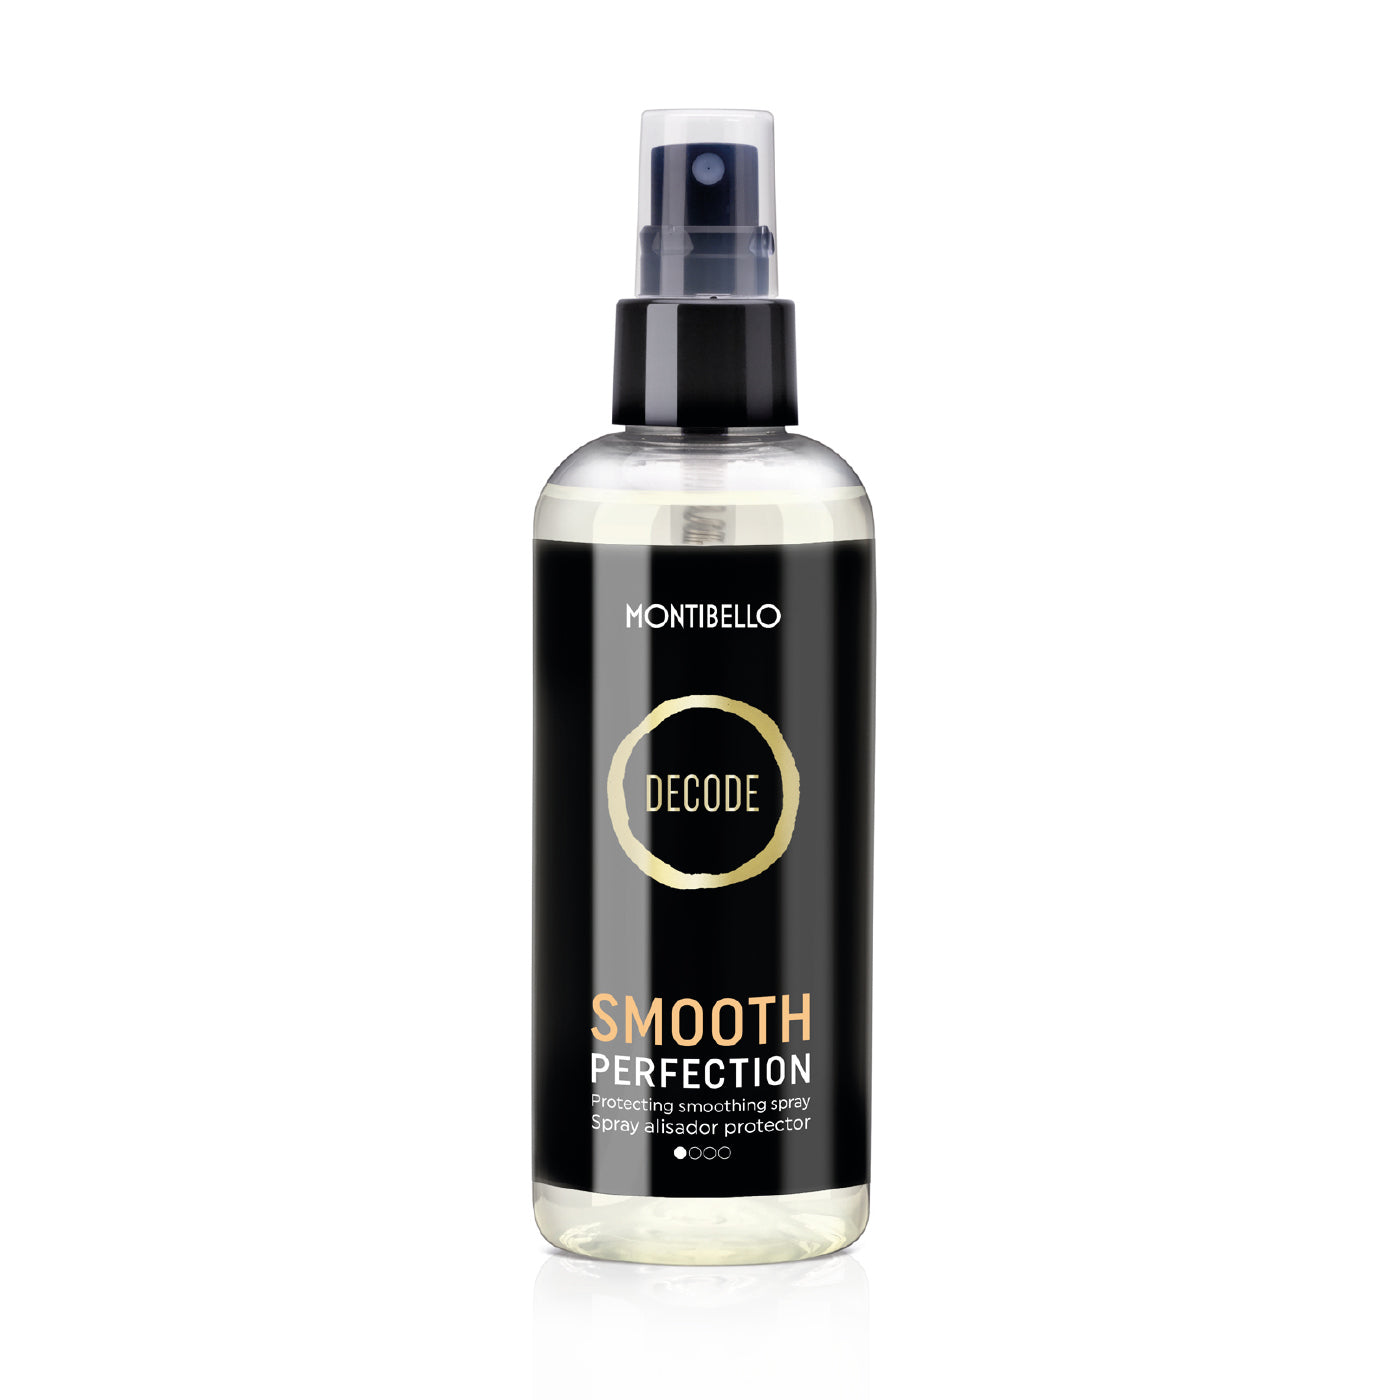 Montibello Decode Smooth Perfection (200ml) – Ultimate Hair and Beauty